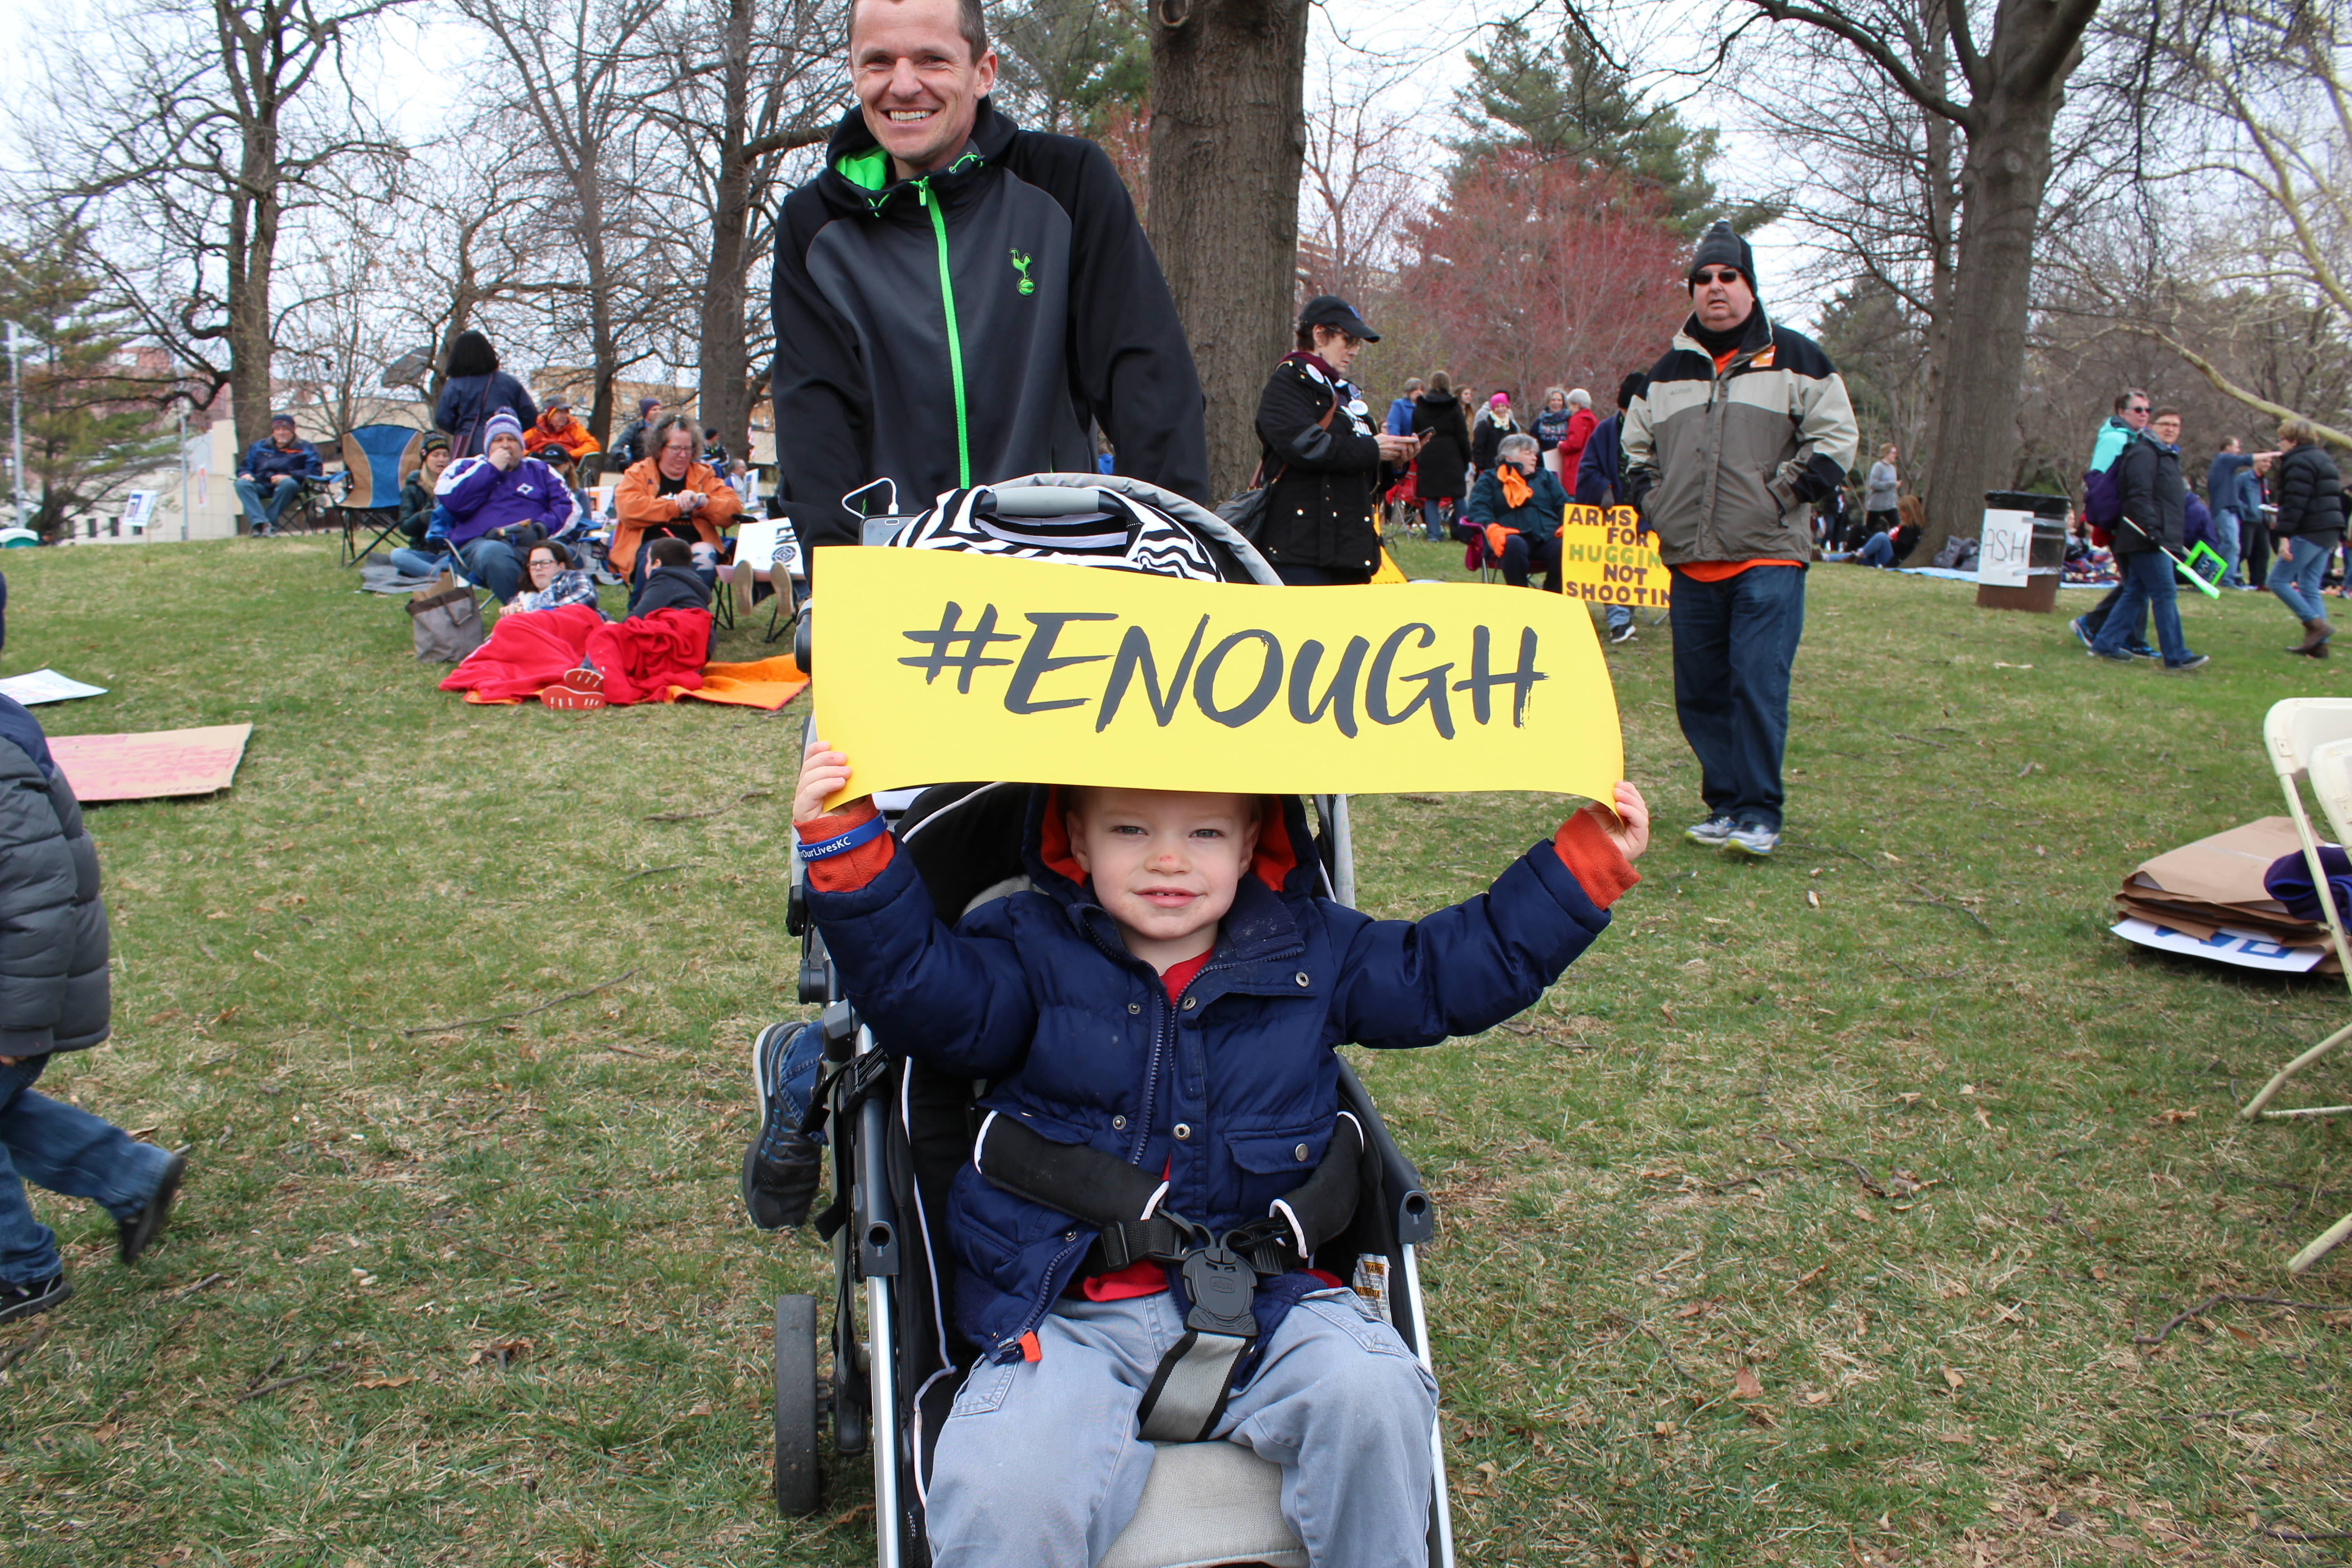 Daniel, strapped in his stroller, held a sign with the popular hashtag that came up after the Parkland, Florida shooting. His father, who was tasked with pushing him around in his stroller, said Daniel had grabbed the sign from a table that was set up by organizers of March for Our Lives Kansas City. Photo: Carina Smith, 14 East.